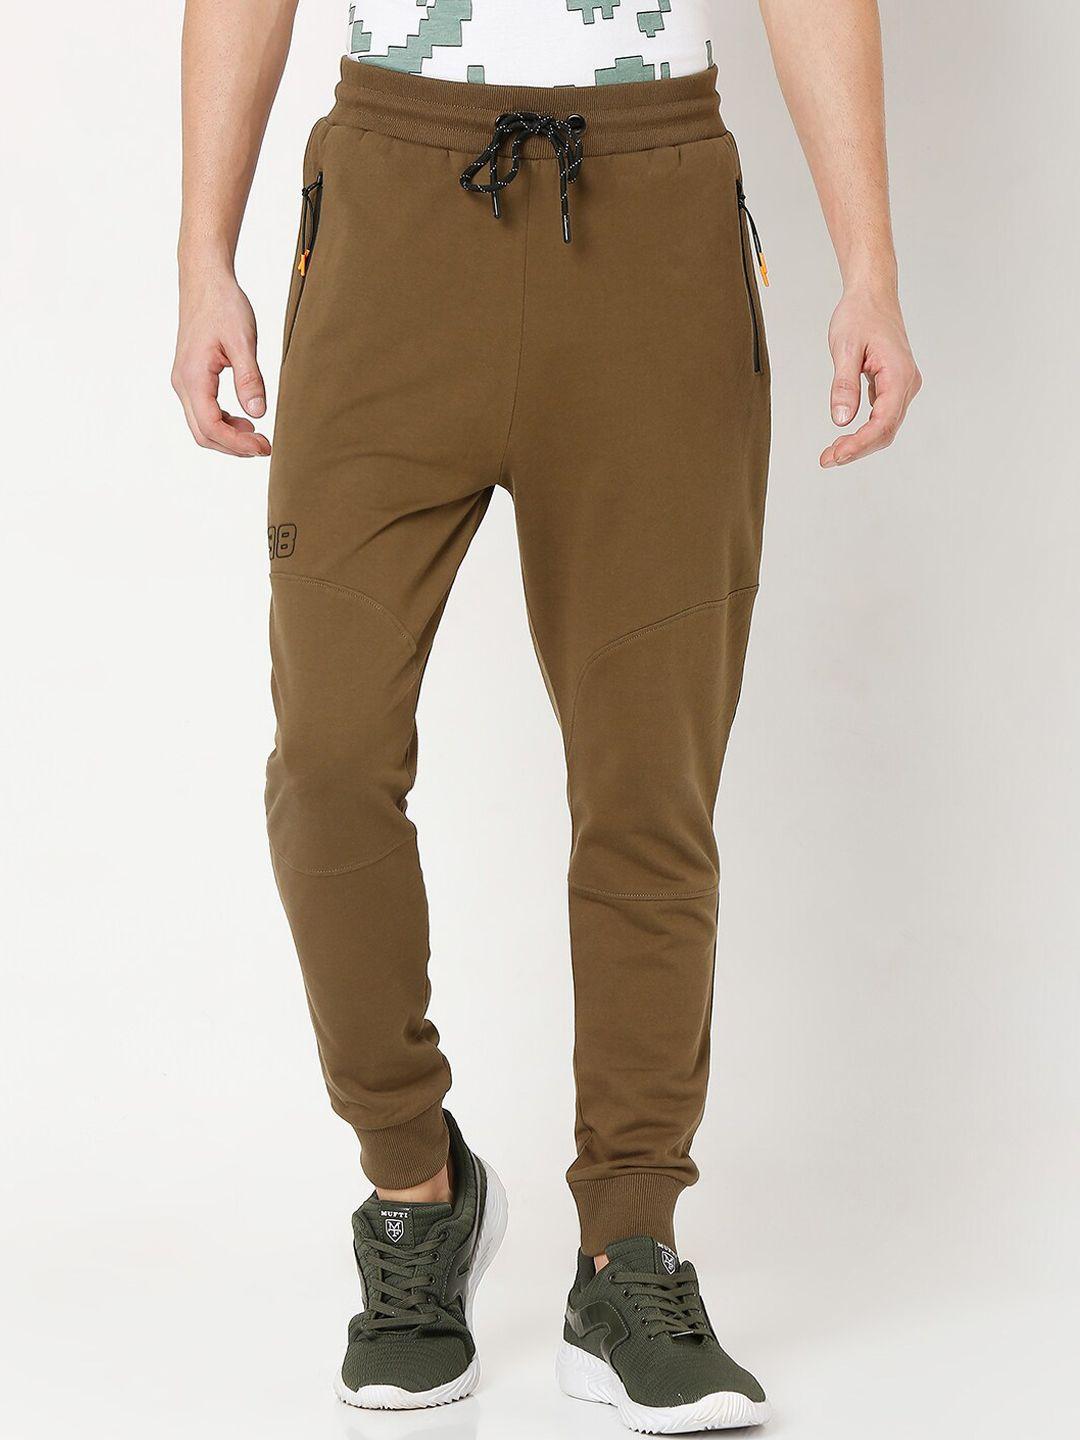 mufti men olive green loose fit joggers trousers